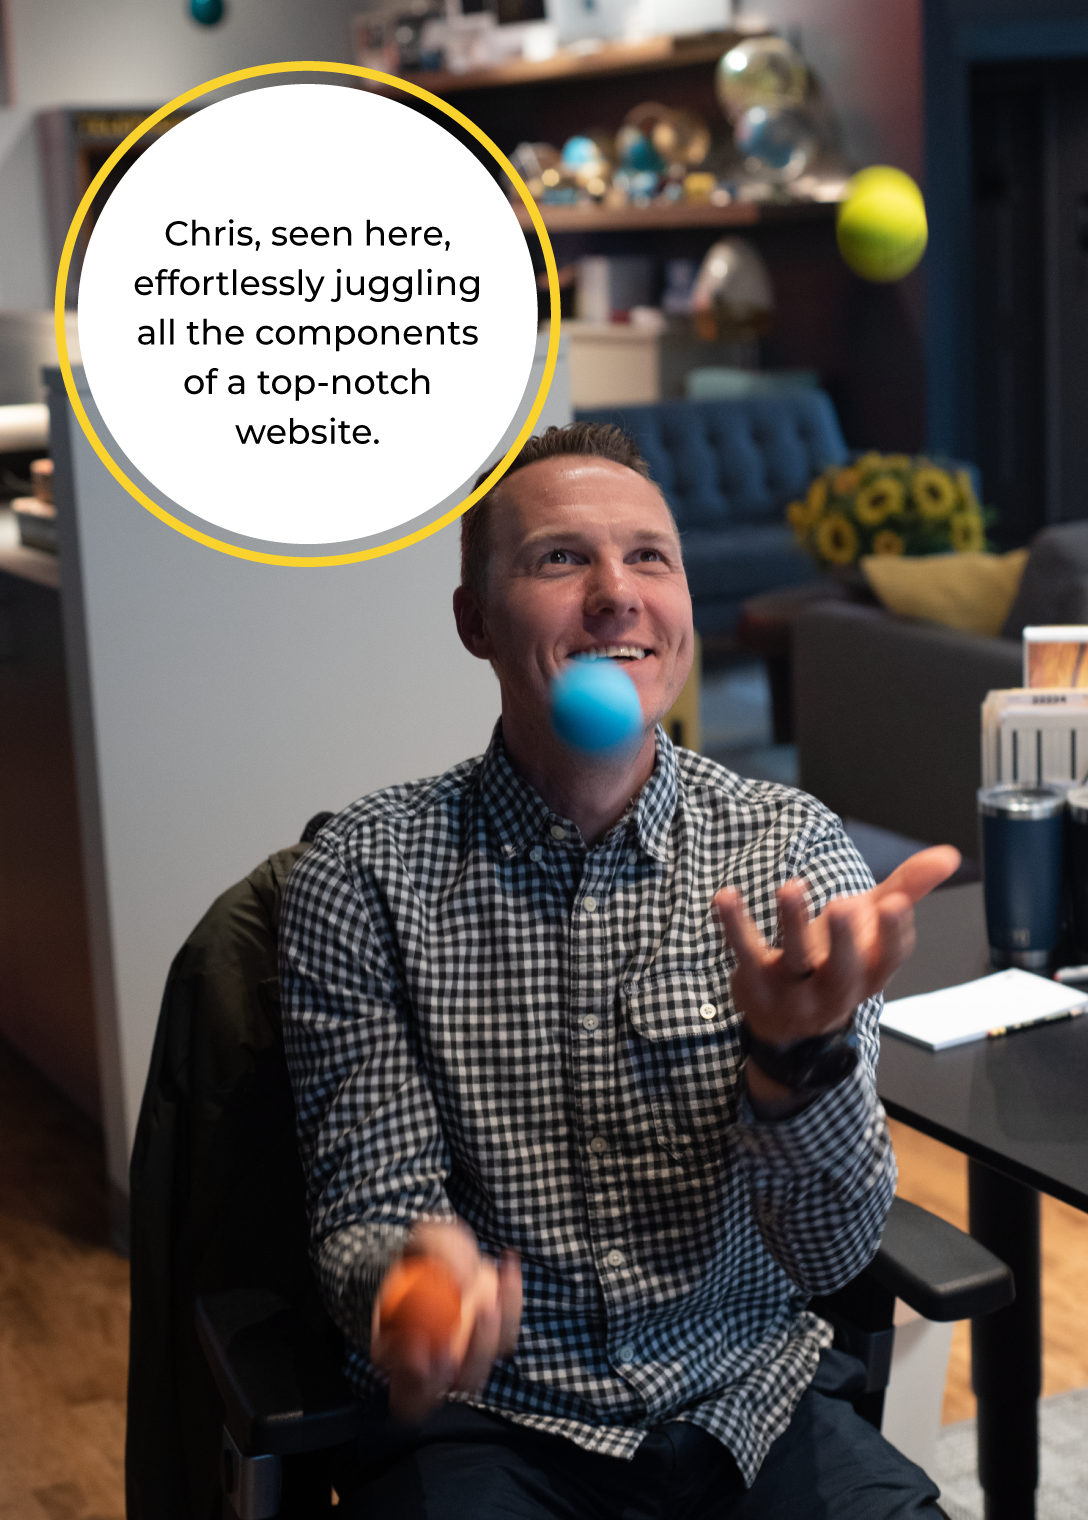 man juggles. Caption reads: Chris, seen here, effortlessly juggling all the components of a top-notch website.